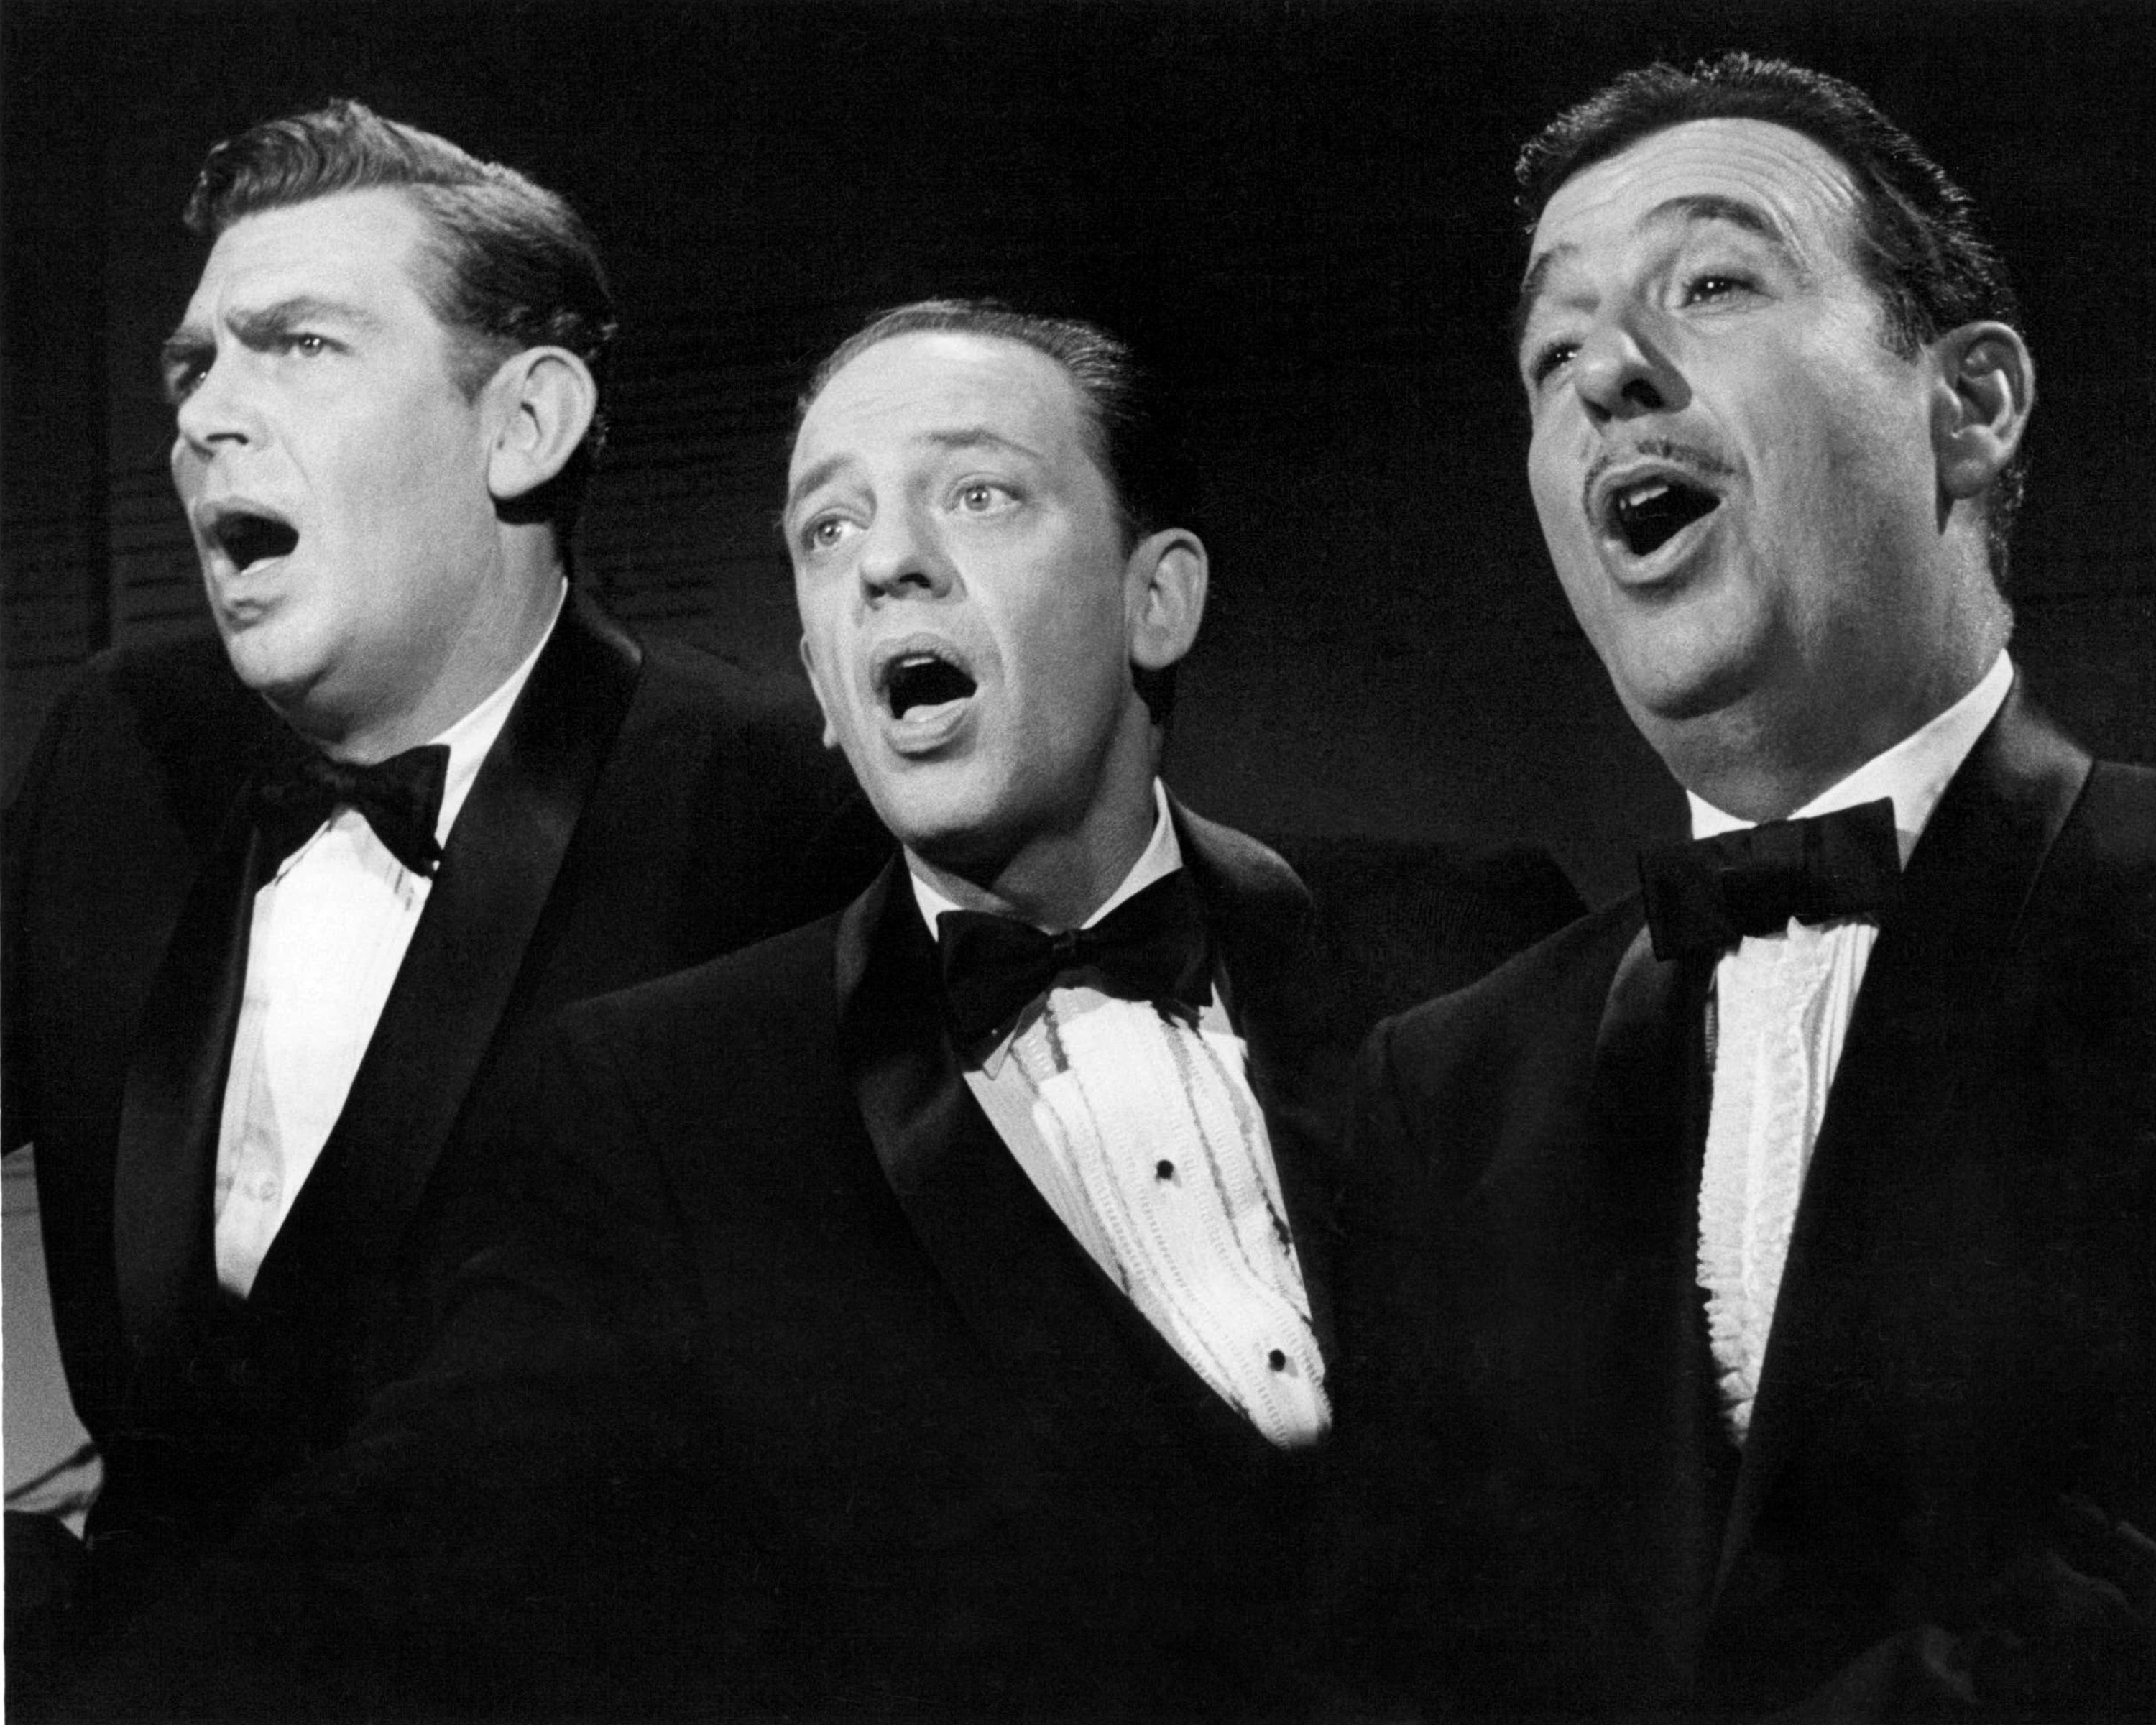 American actors (left to right) Andy Griffith (1926 - 2012), Don Knotts (1924 - 2006) and Jack Dodson (1931 - 1994) singing, circa 1965. They play Andy Taylor, Barney Fife and Howard Sprague, respectiThe Andy Griffith Show'.